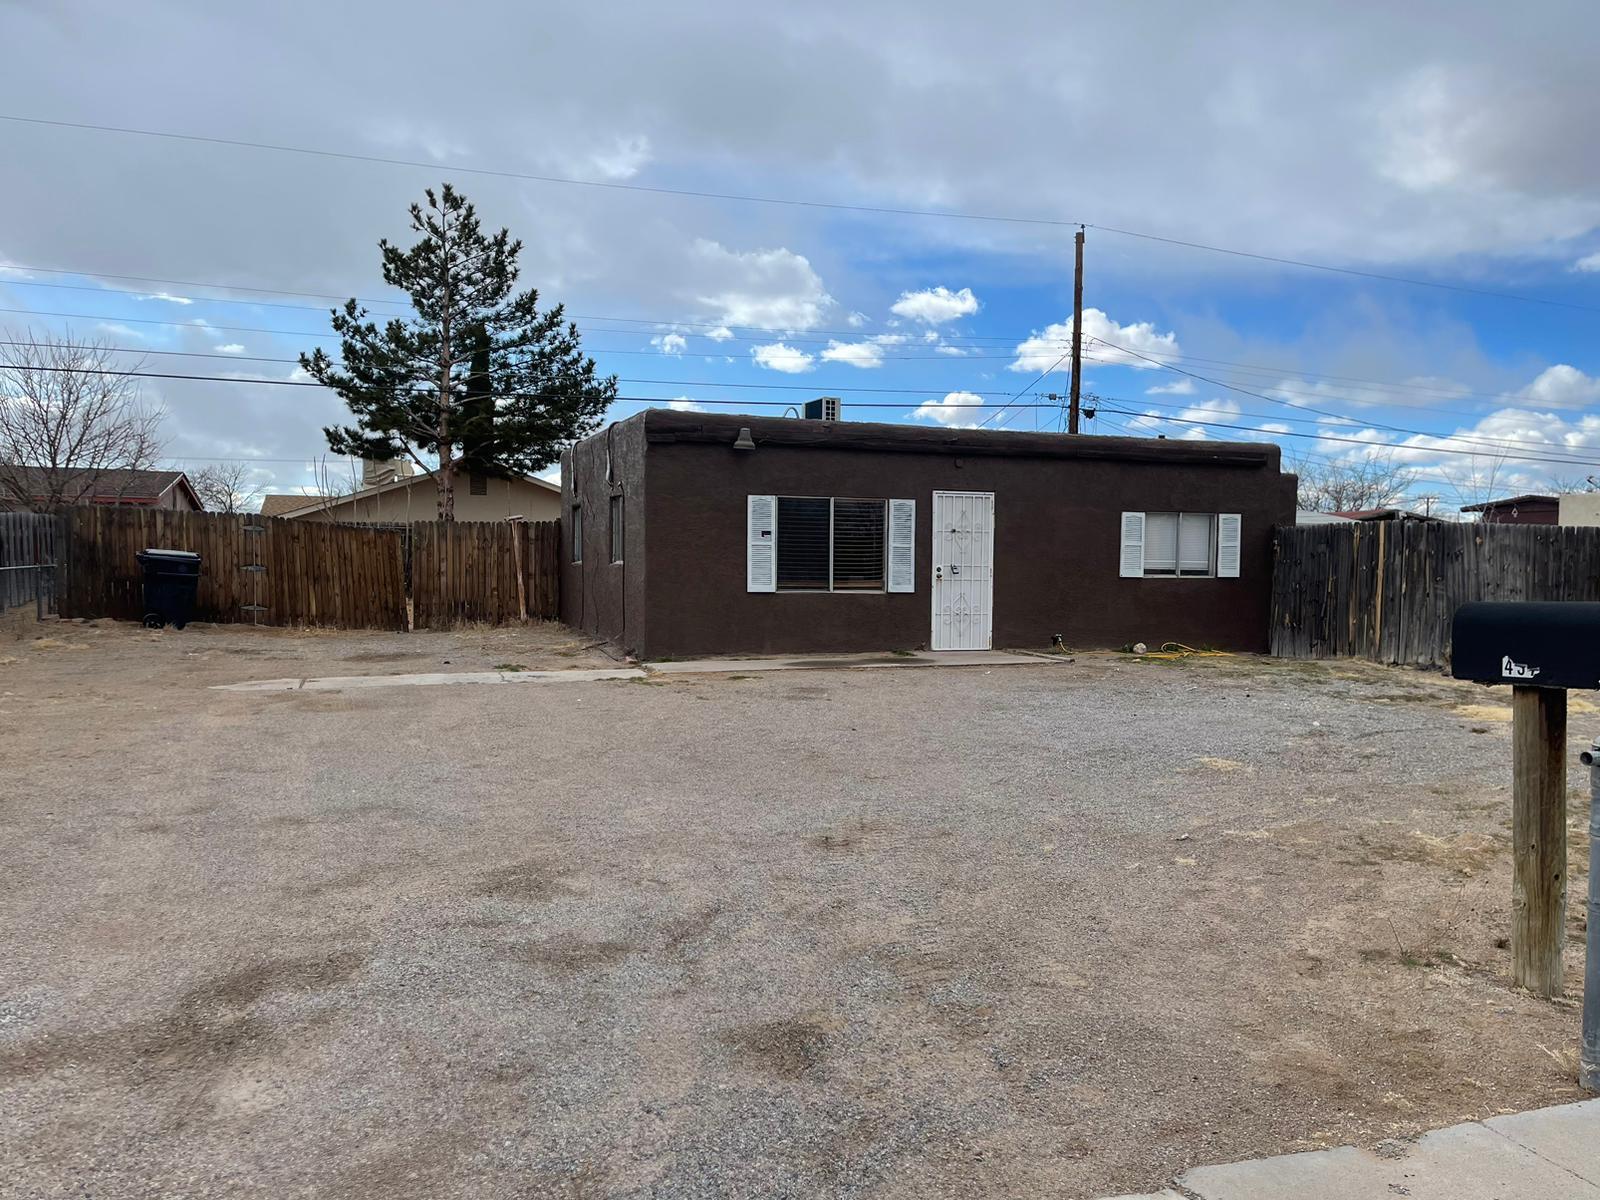 Complete remodeled home, with new mini split units for heating and cooling, painting, flooring and much more, great area, nice big yard, this one will go fastSeller will consider REC with 84k down P&I 1,671 at 12% rate for as long as you wish